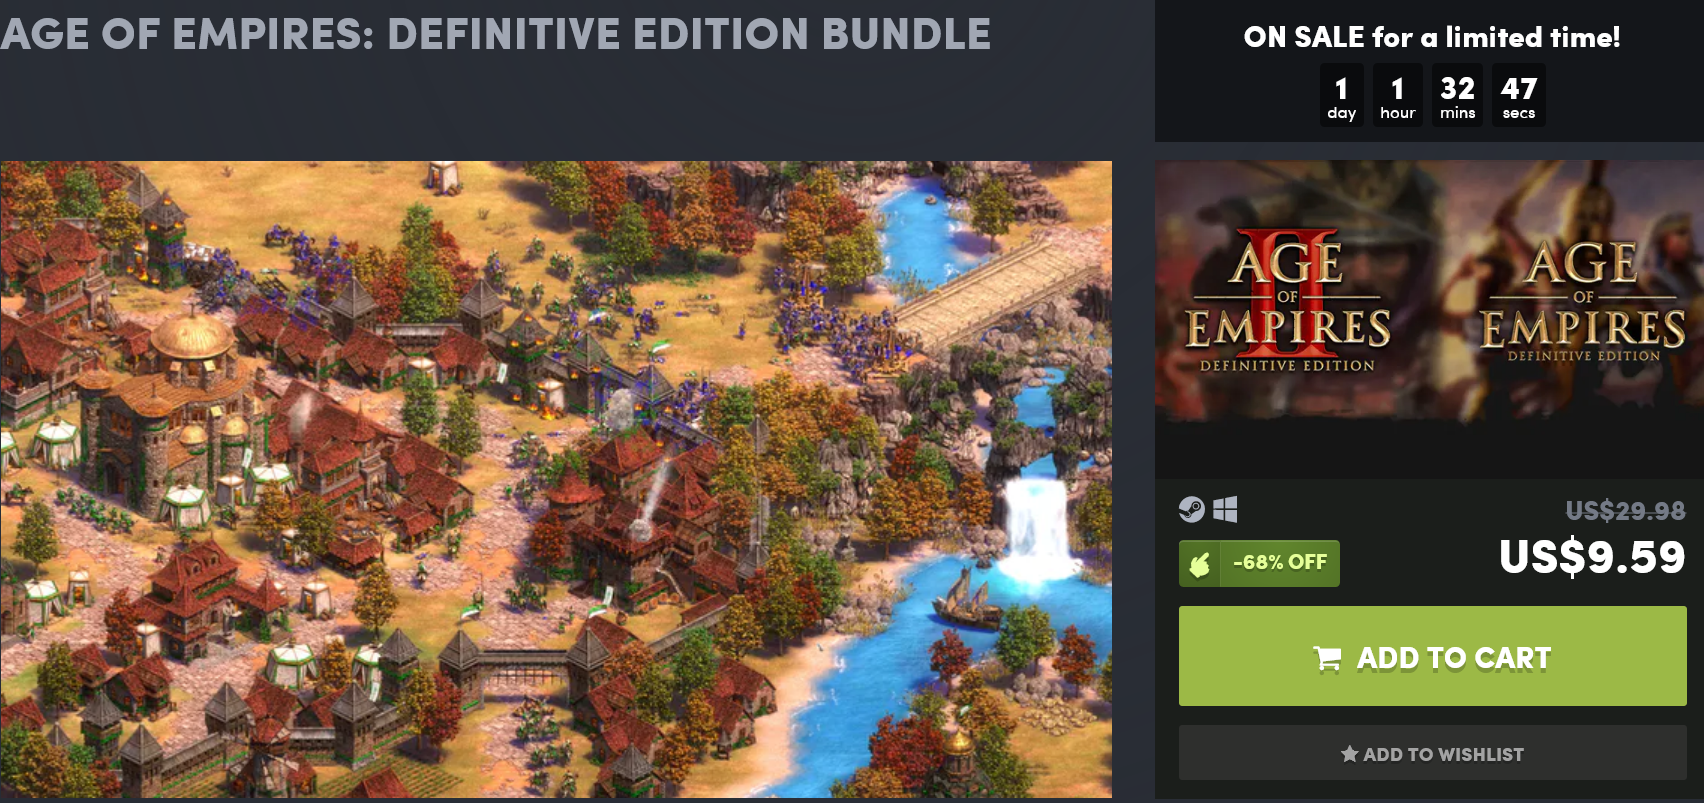 Screenshot 2021-09-06 at 00-27-08 Buy Age of Empires Definitive Edition Bundle from the Humble Store.png